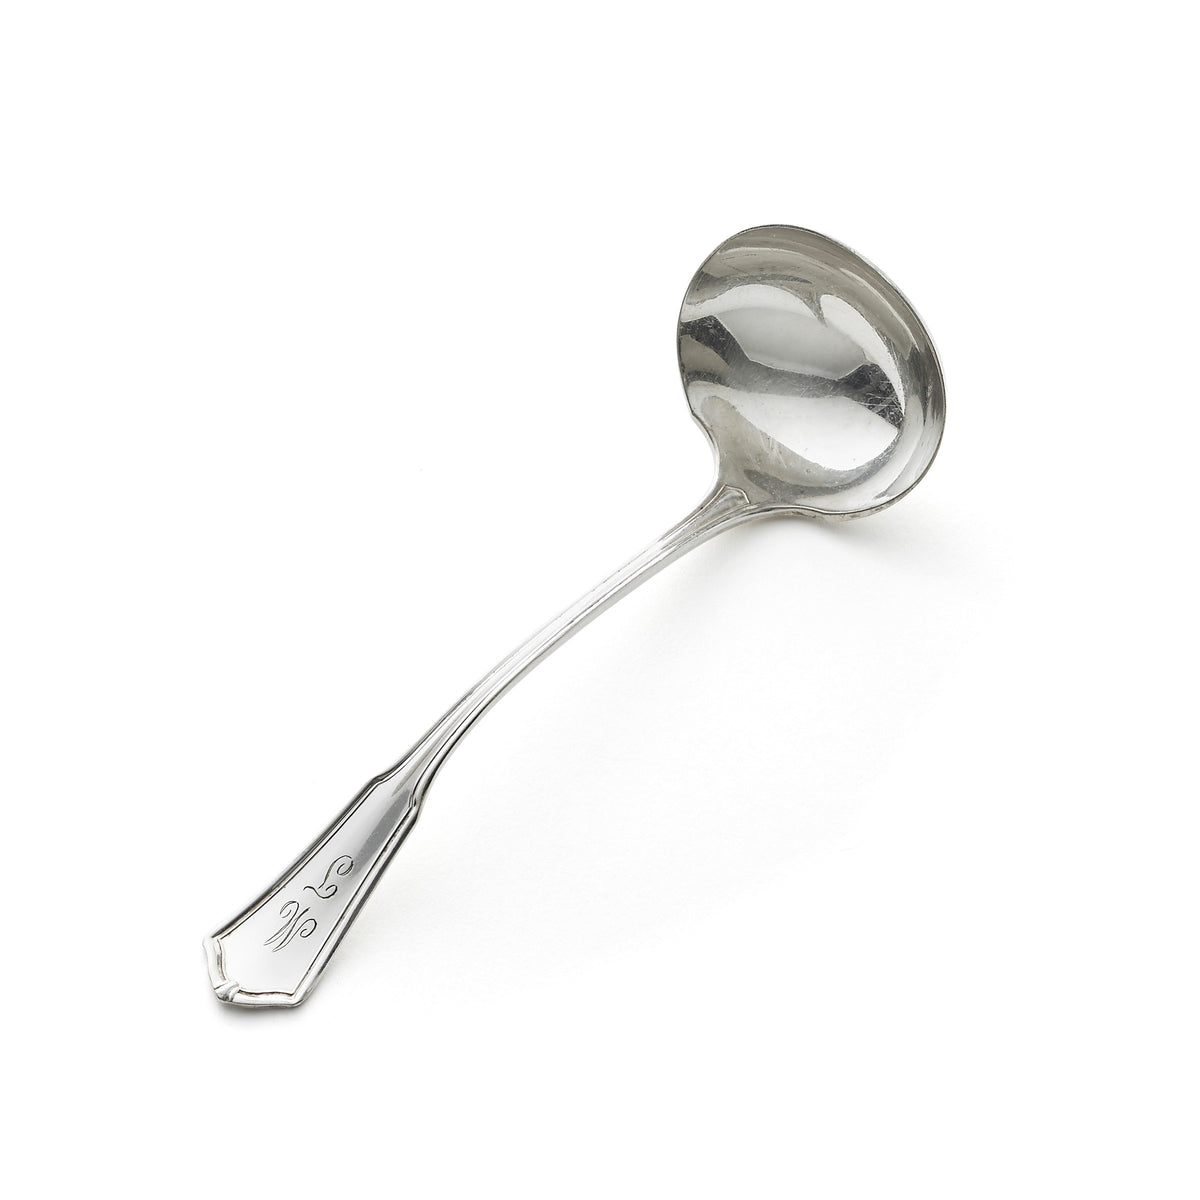 Vintage, silver-plated ladle, collected and restored by Caskata.